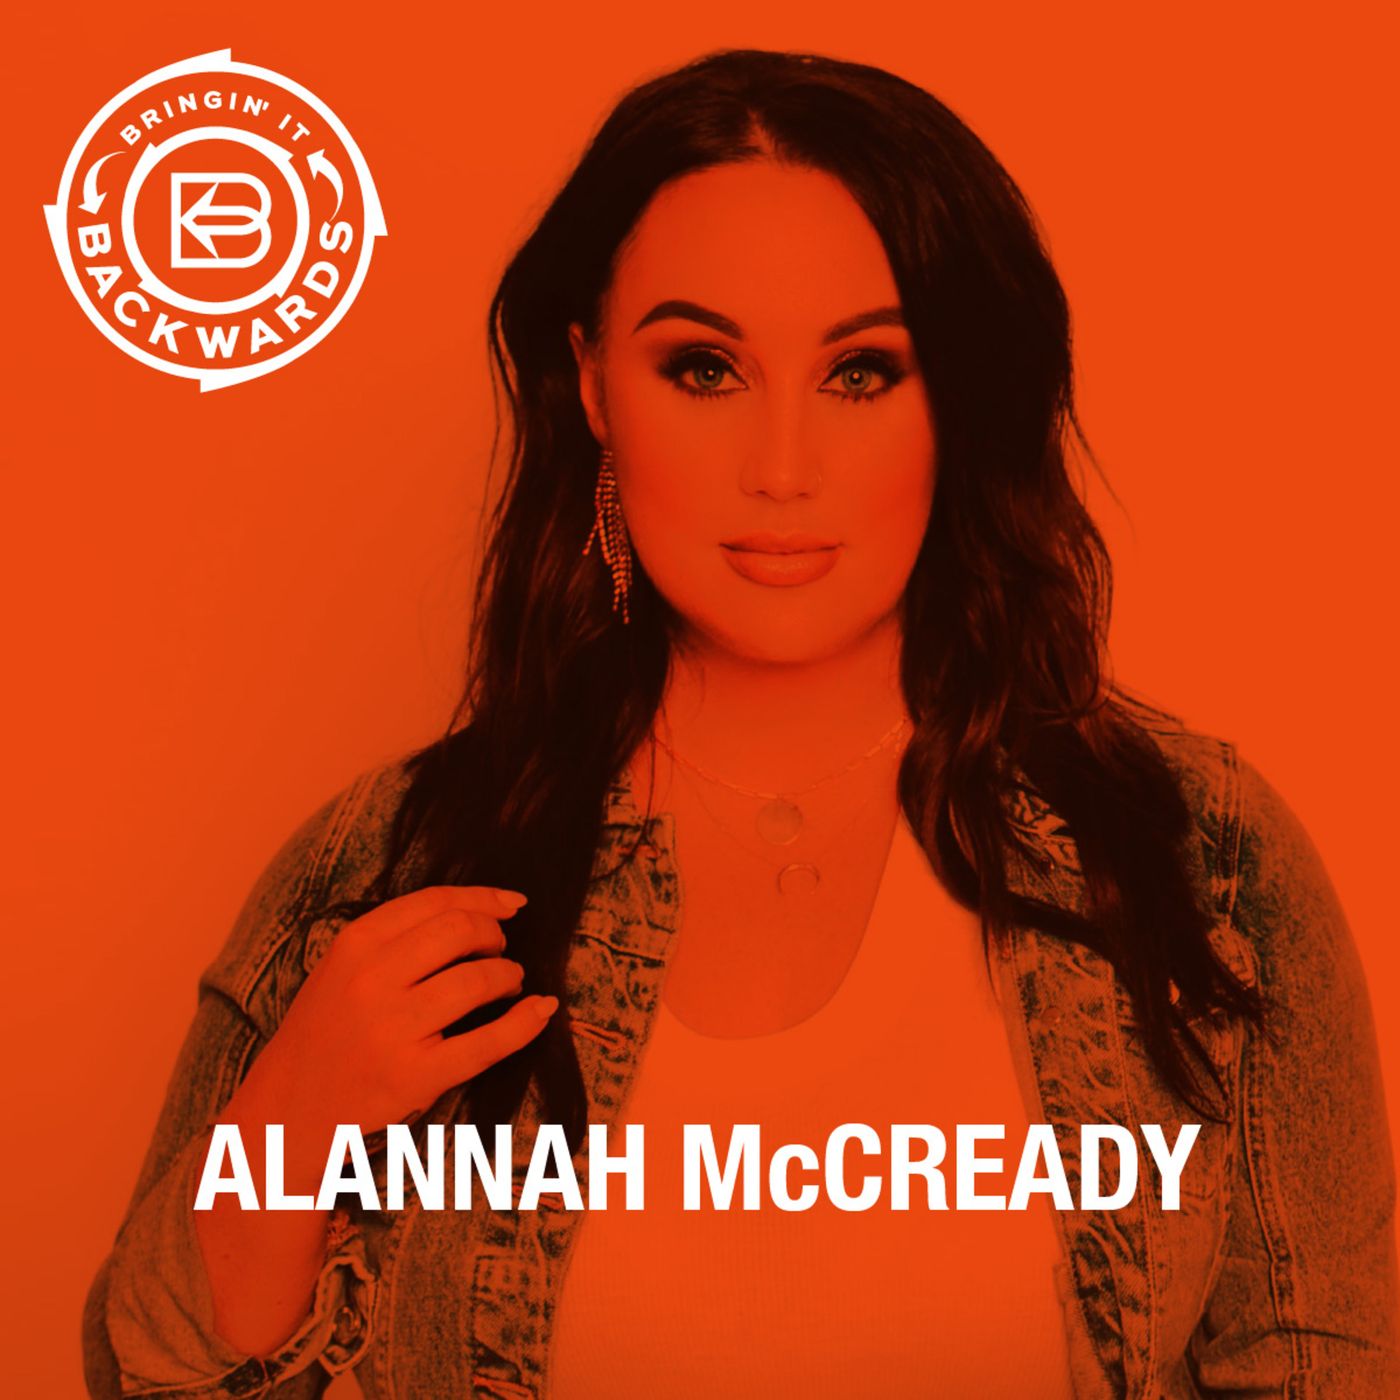 Interview with Alannah McCready Image